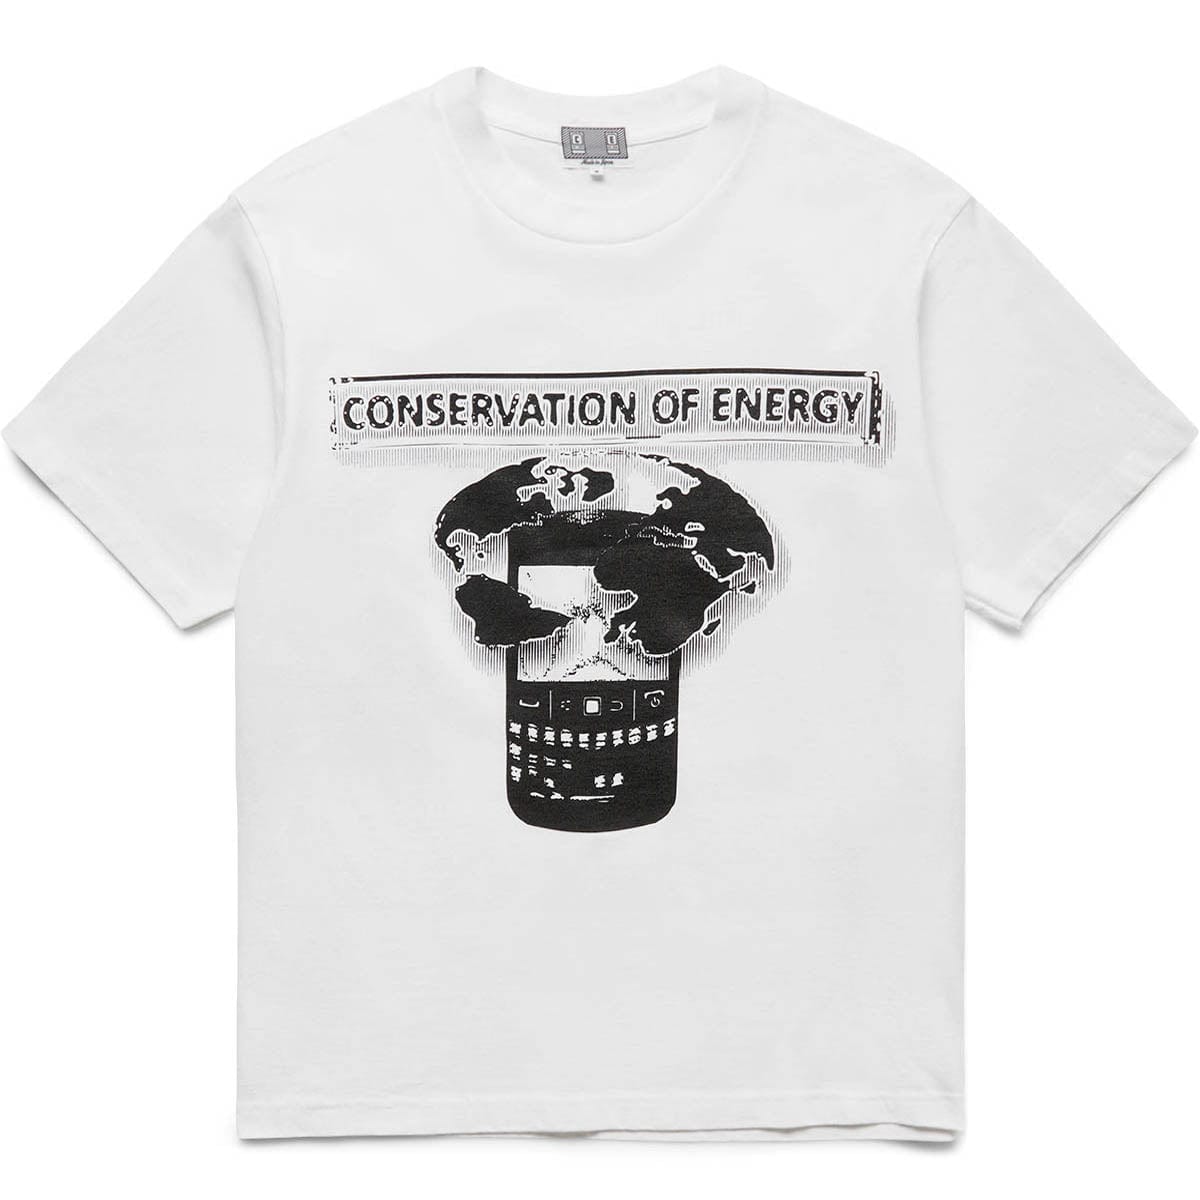 Cav Empt T-Shirts CONSERVATION OF ENERGY T